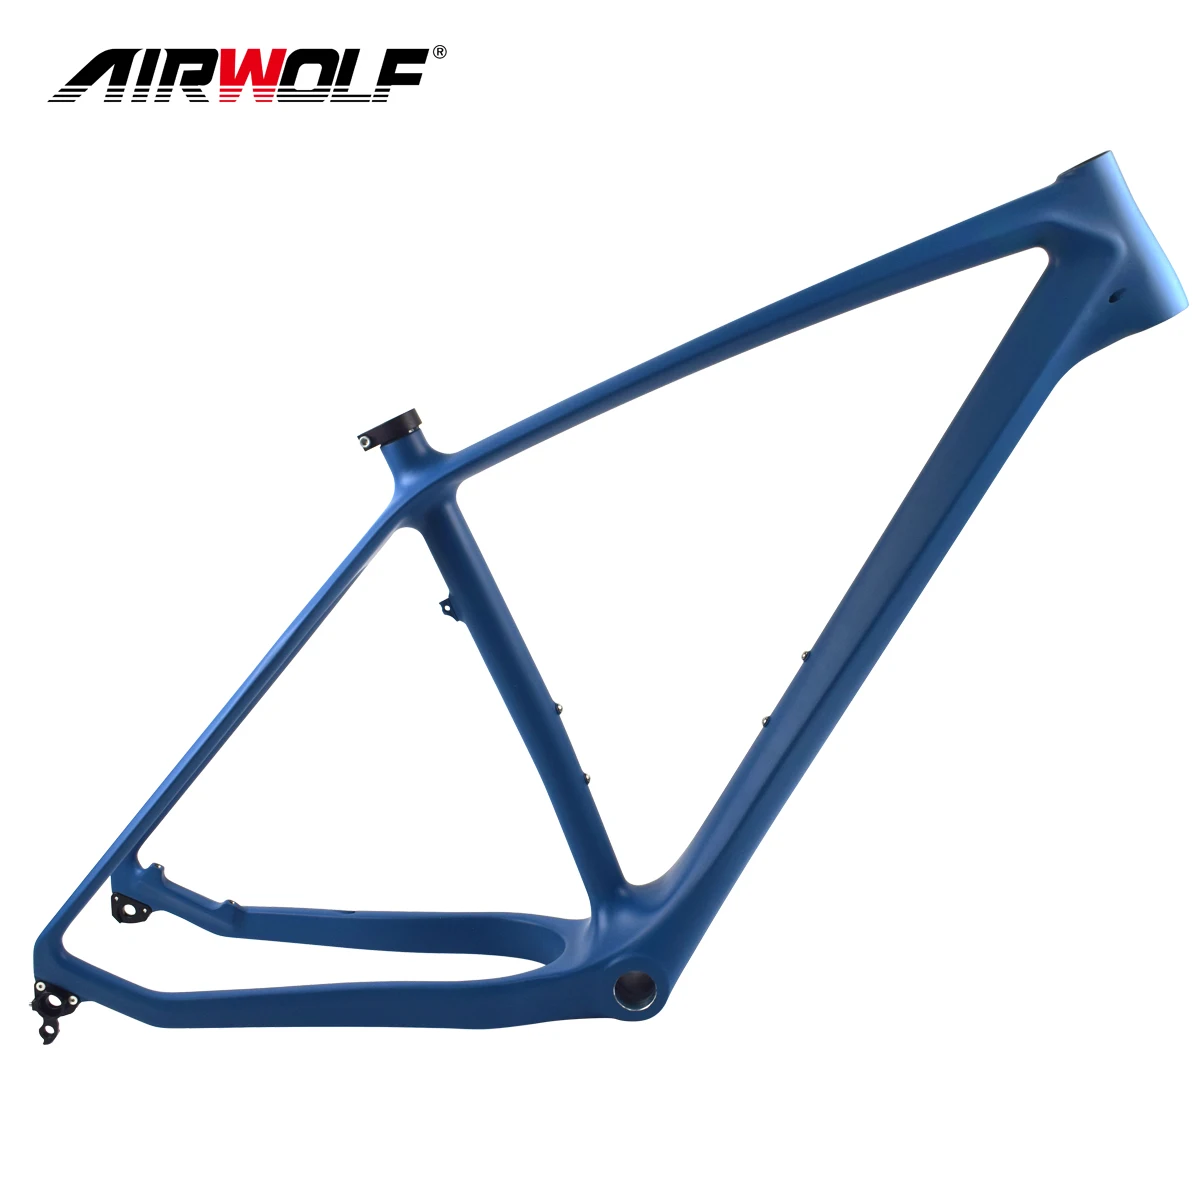 Airwolf New Carbon Fat Bike Frame 26er Snowbiking Bicycle Frameset Di2 or Mechaniacl Internal Cable Carbon Frames 16 18 20 inch